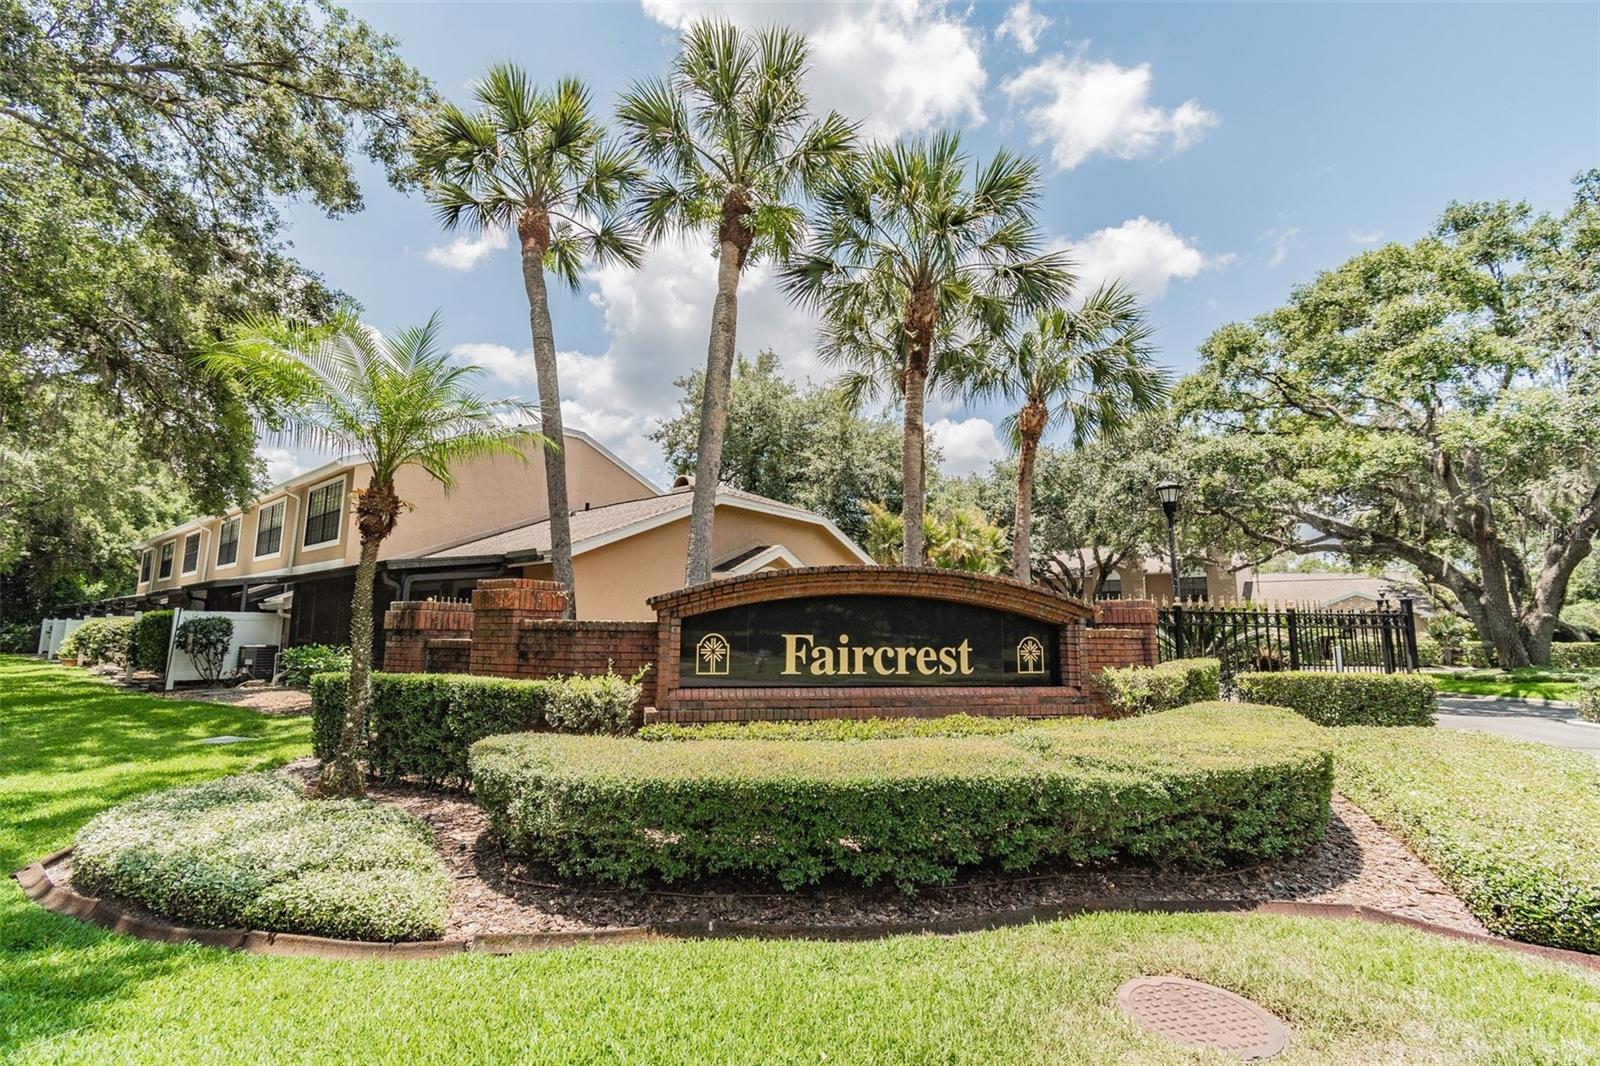 Faircrest is a Gated Community in Tampa Palms